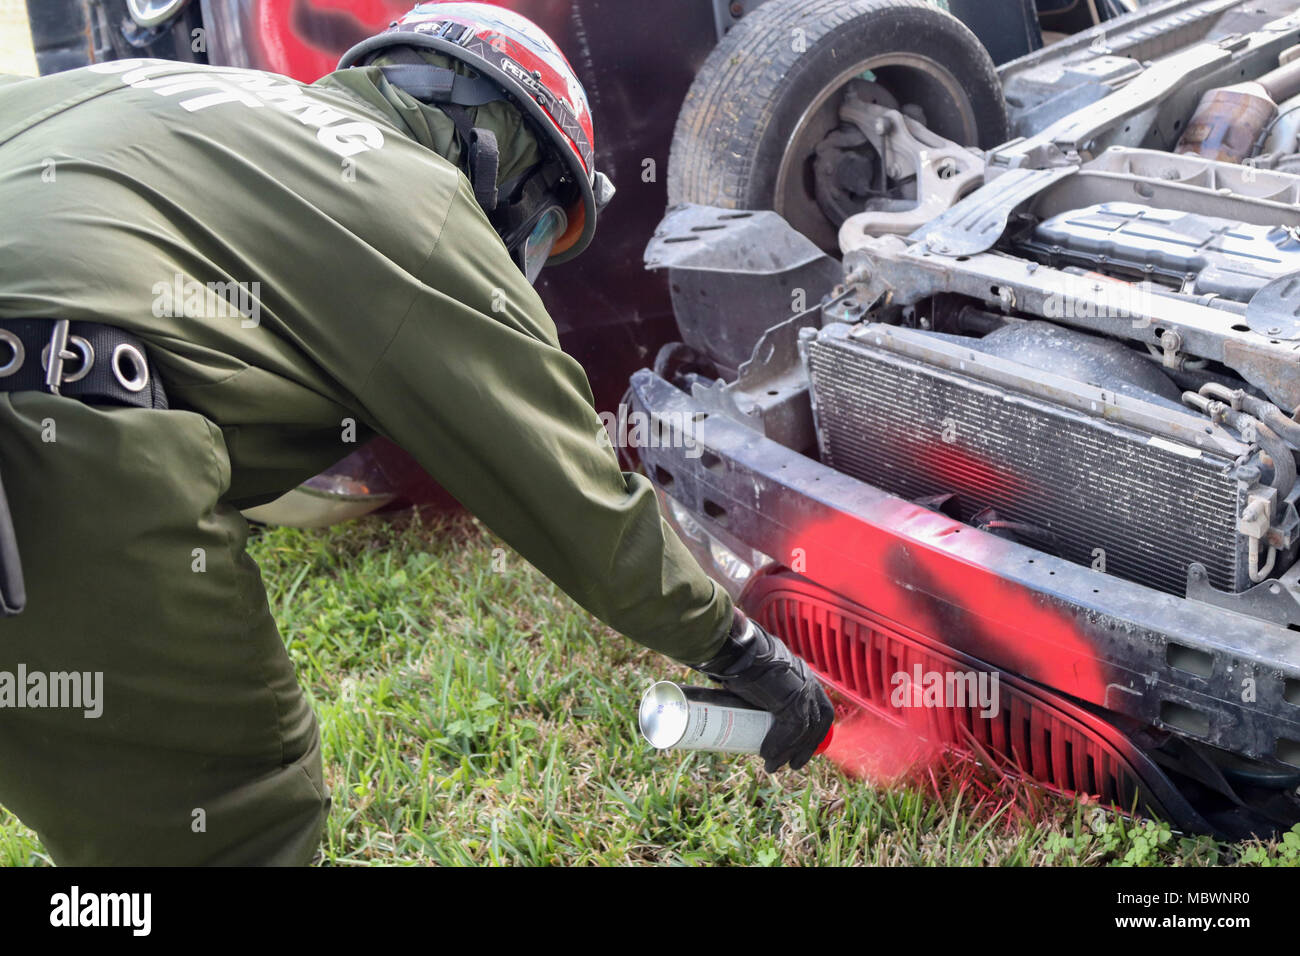 A Soldier assigned to the 414th Chemical Company from Orangeburg, South Carolina marks vehicles with identification symbols, signaling the type of simulated casualty located within during a Joint Training Exercise hosted by the Homestead-Miami Speedway and Miami-Dade Fire Department in Miami, Florida. Jan. 11, 2018. This JTE focused on building response capabilities and the seamless transition between the local first responders and the follow-on support provided by the National Guard and Active duty soldiers. (U. S. Army Photo by Spc. Samuel Brooks) Stock Photo